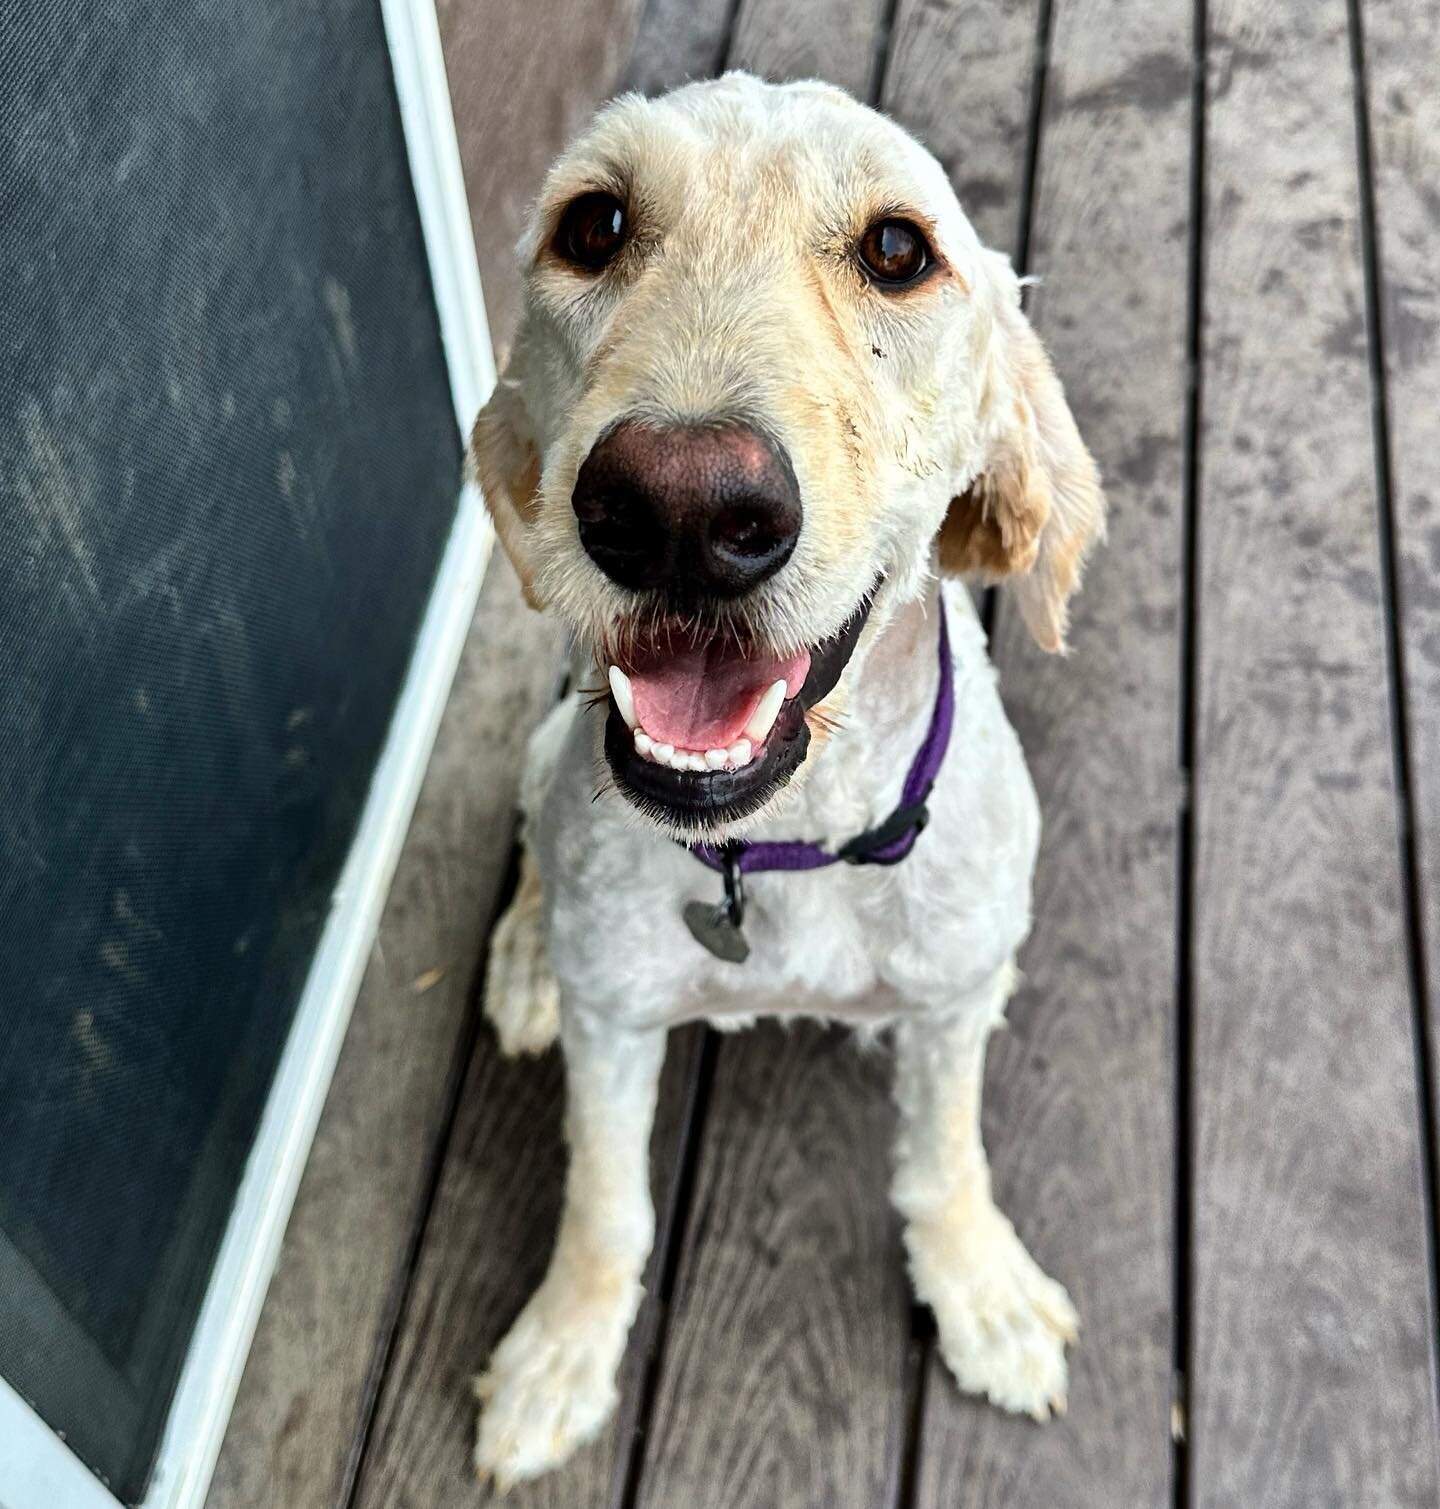 COURTESY POST: We are helping to find a good home for Quinn, a 1-year old Golden Doodle. She&rsquo;s crate train and house trained and good with dogs and cats. Email marla@josiesmisfitranch for more information! #goldendoodle #lookingforanewhome